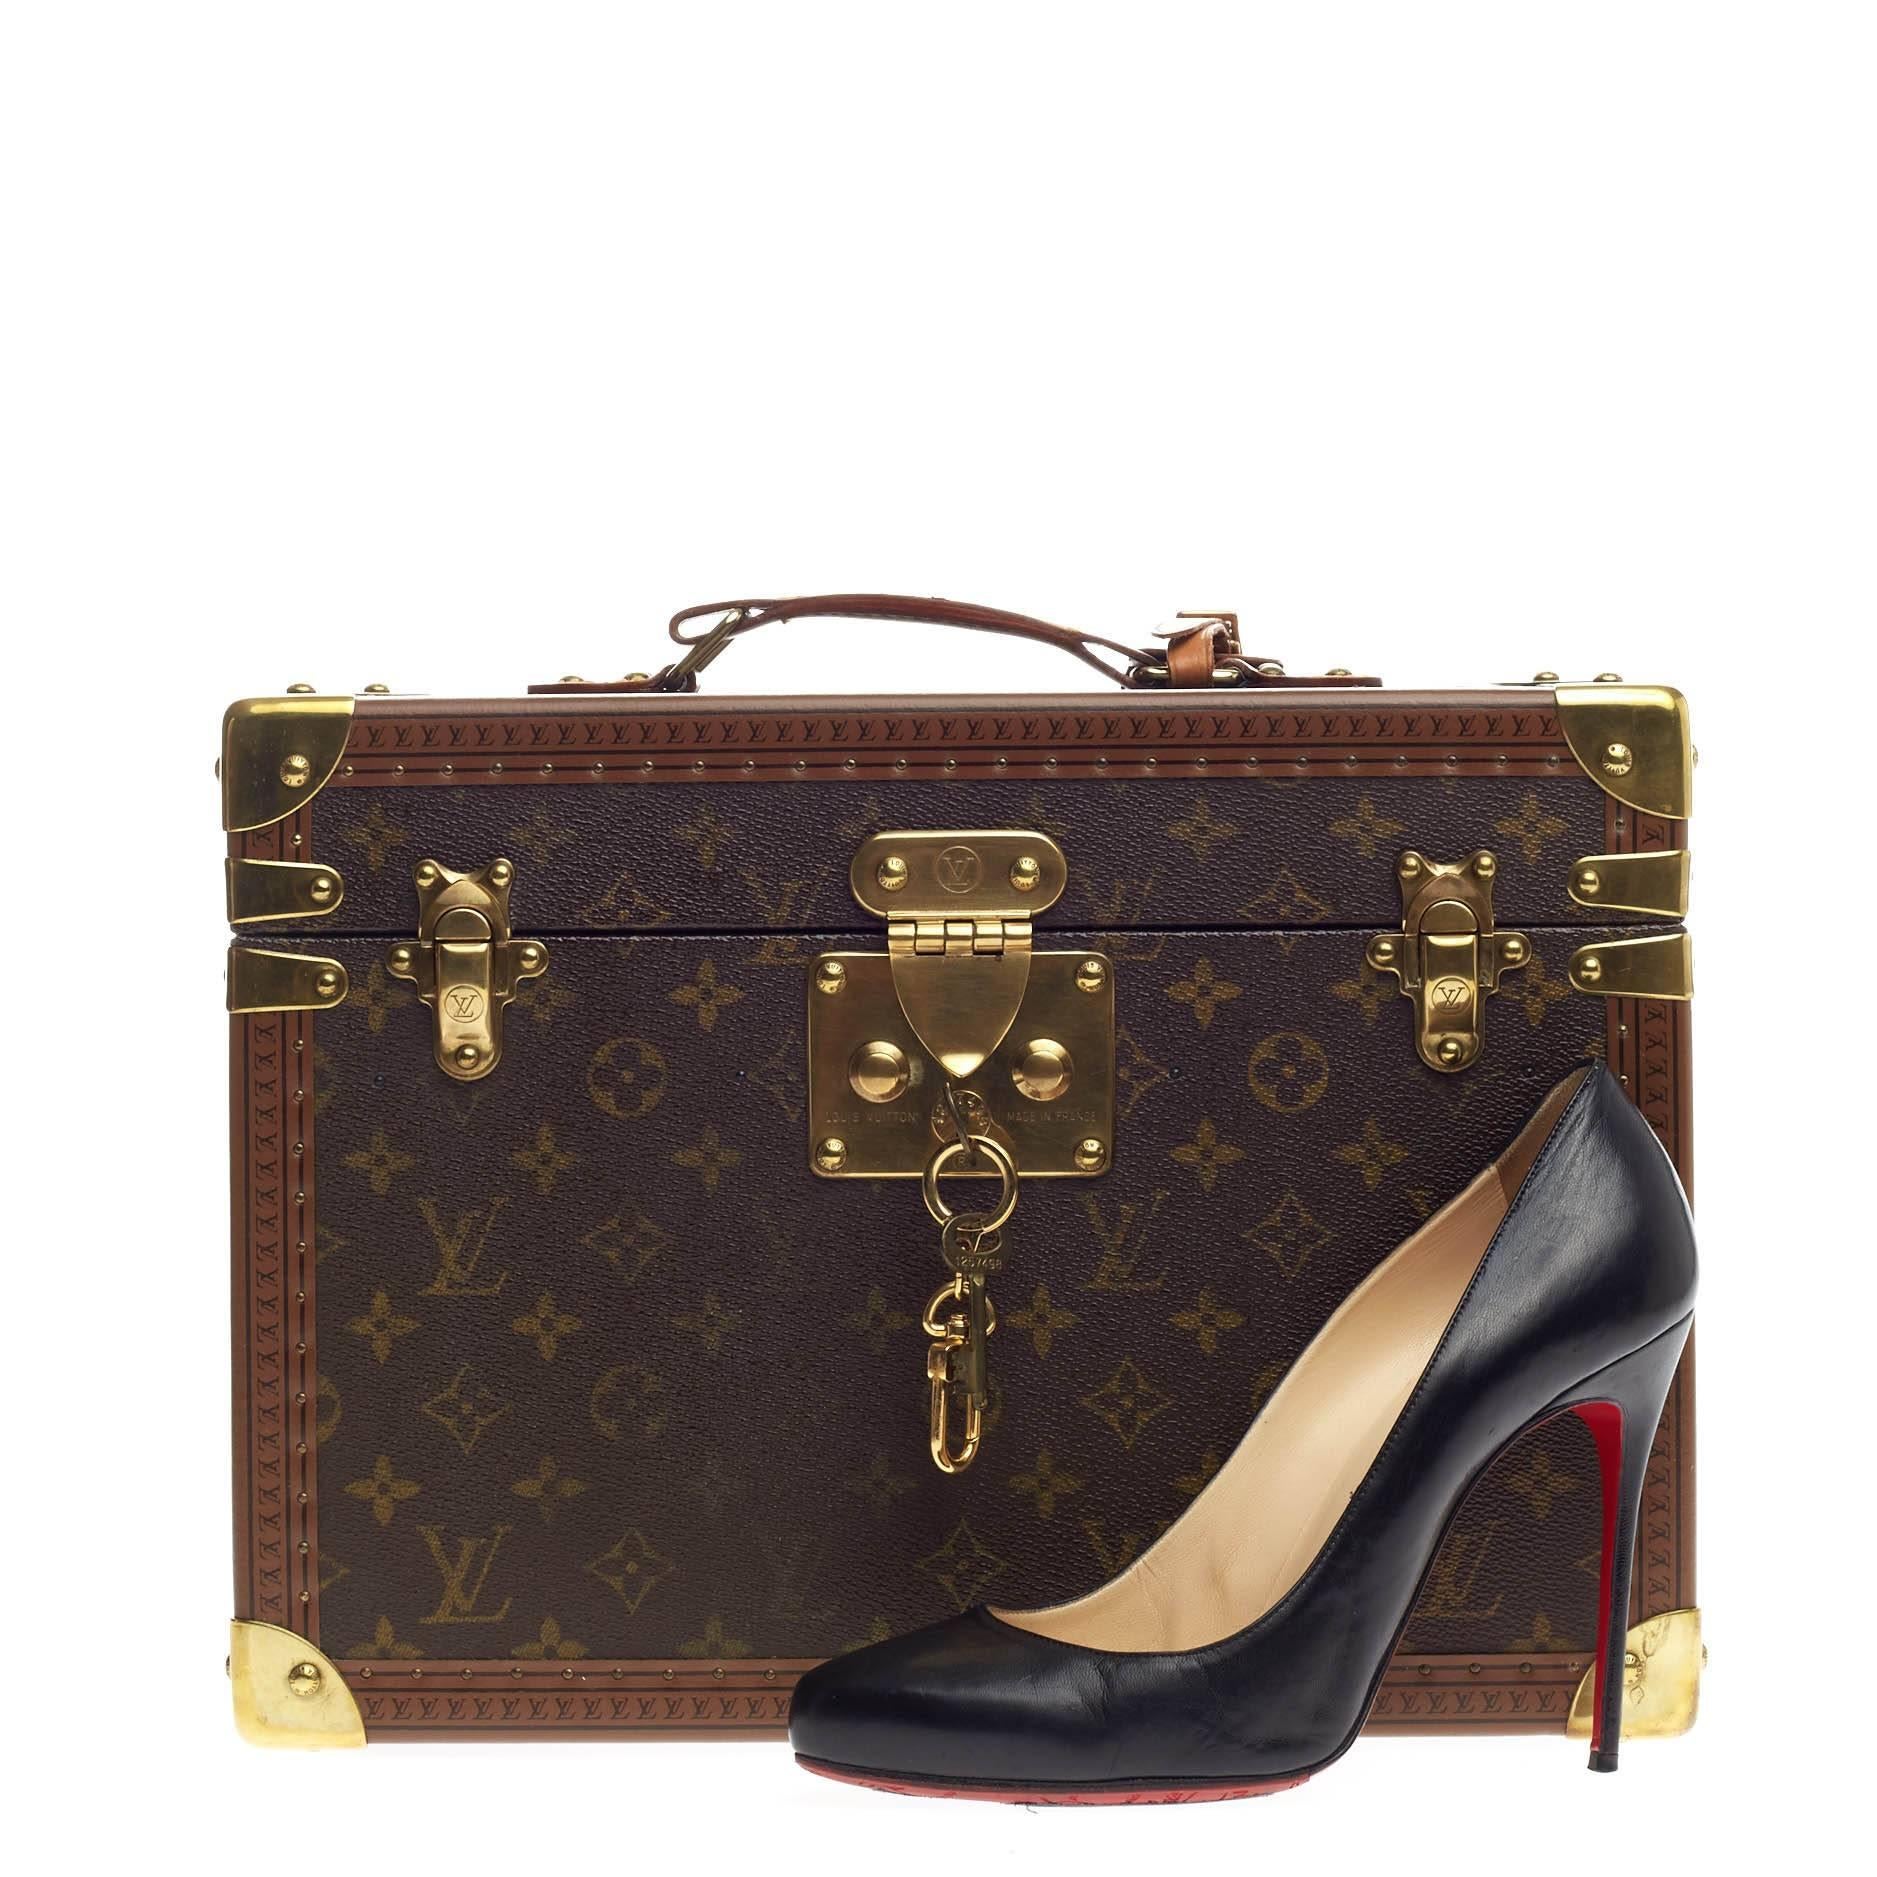 This authentic Louis Vuitton Boite Pharmacie Monogram Canvas is an outstanding, timeless collector's piece that is versatile and draws all the attention. Crafted from brown monogram coated canvas, this hard-to-find case features a flat top handle,